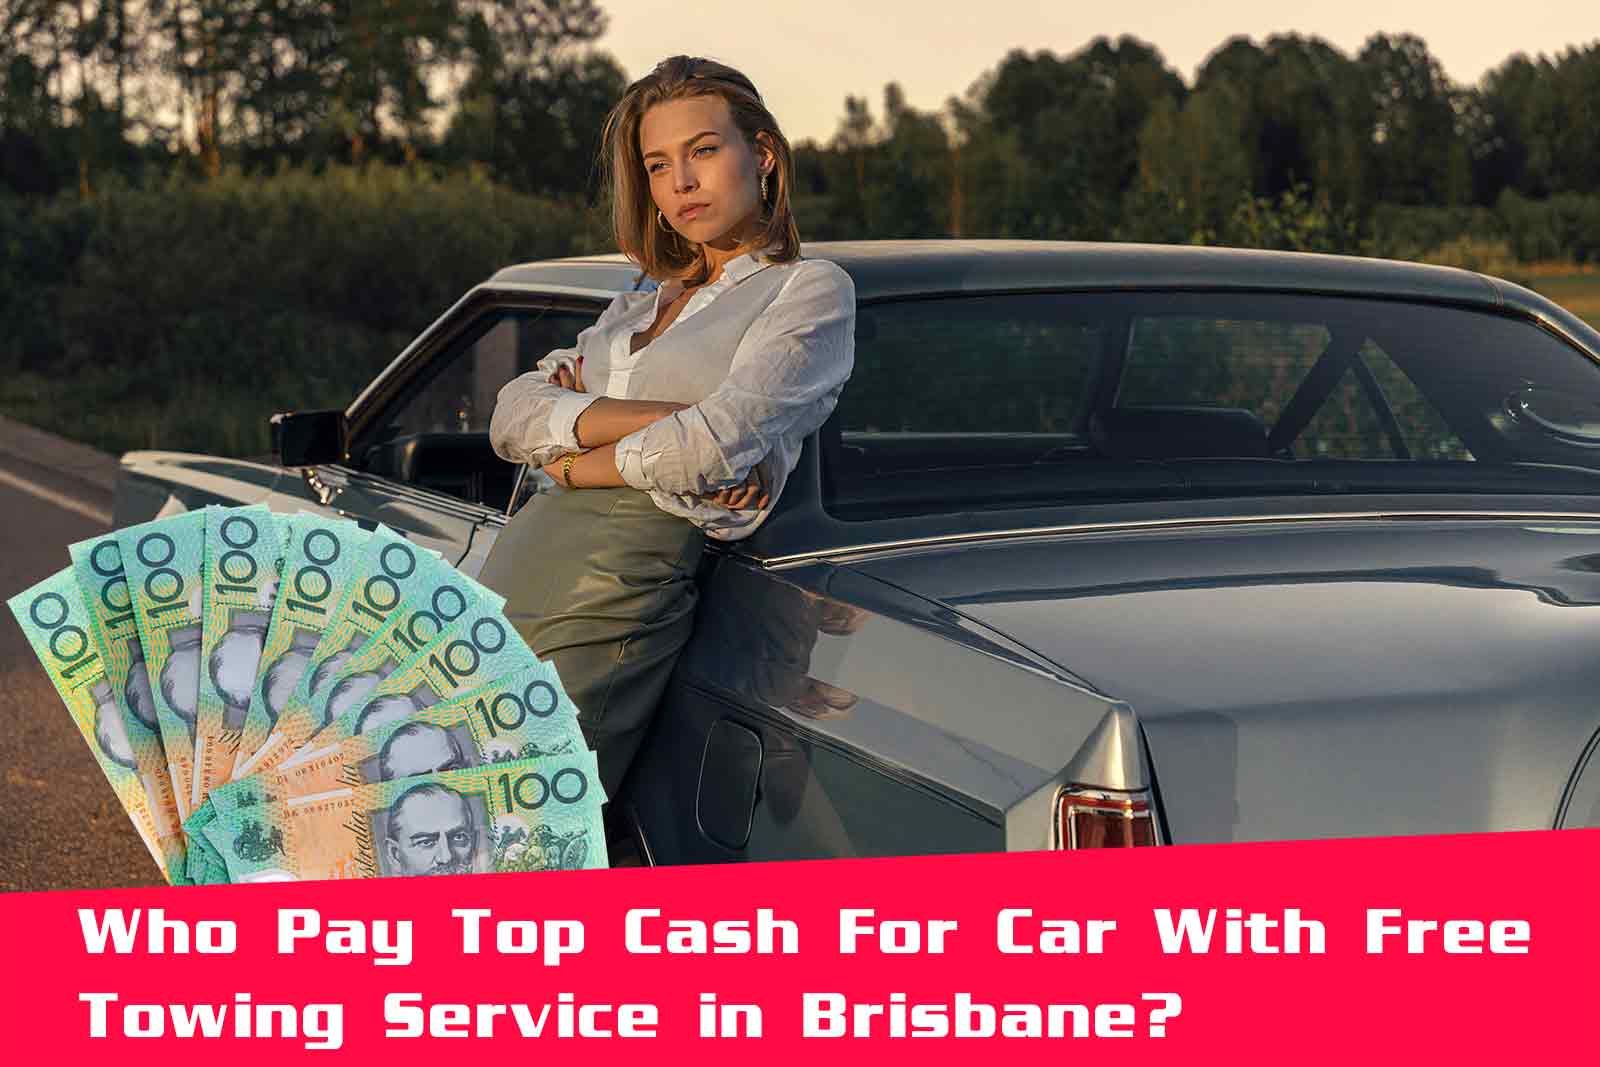 Who Pay Top Cash For Car With Free Towing Service in Brisbane?